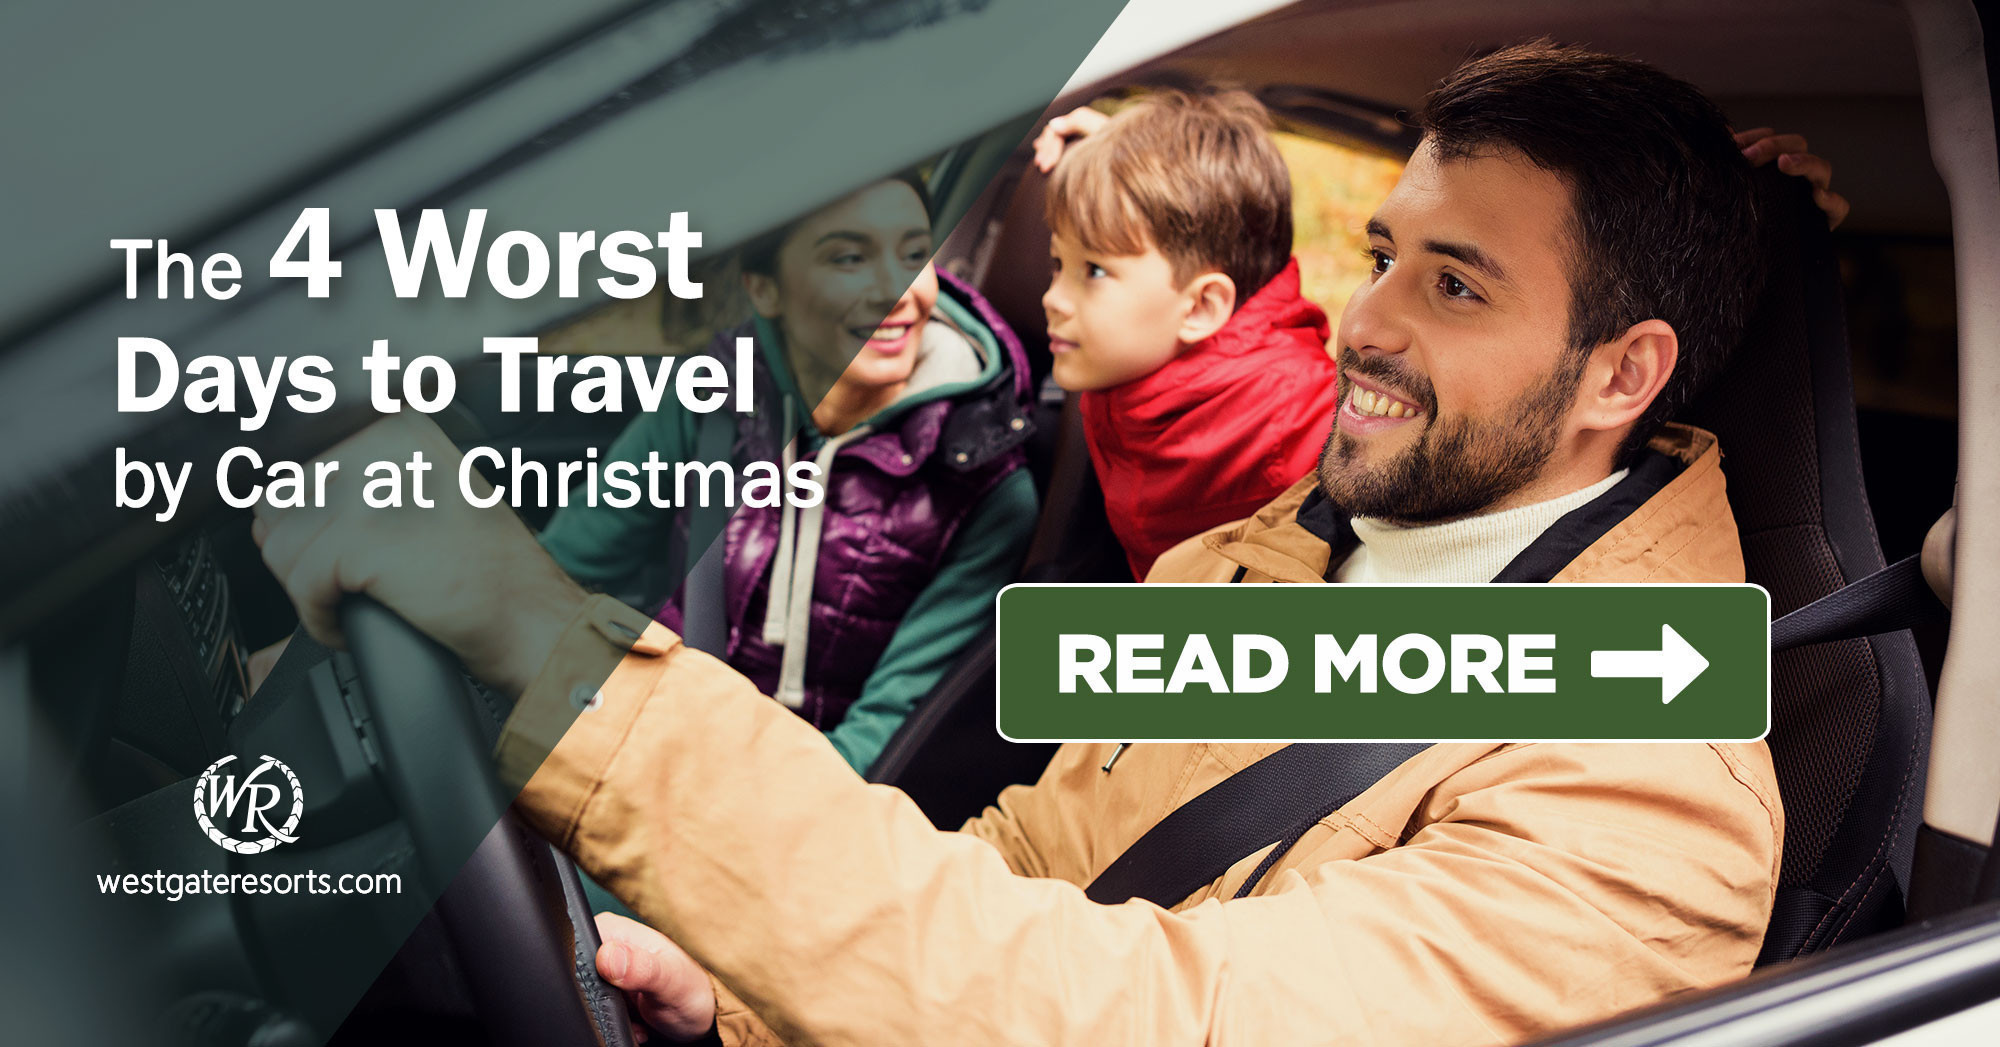 The 4 Worst Days to Travel by Car at Christmas | Westgate Resorts